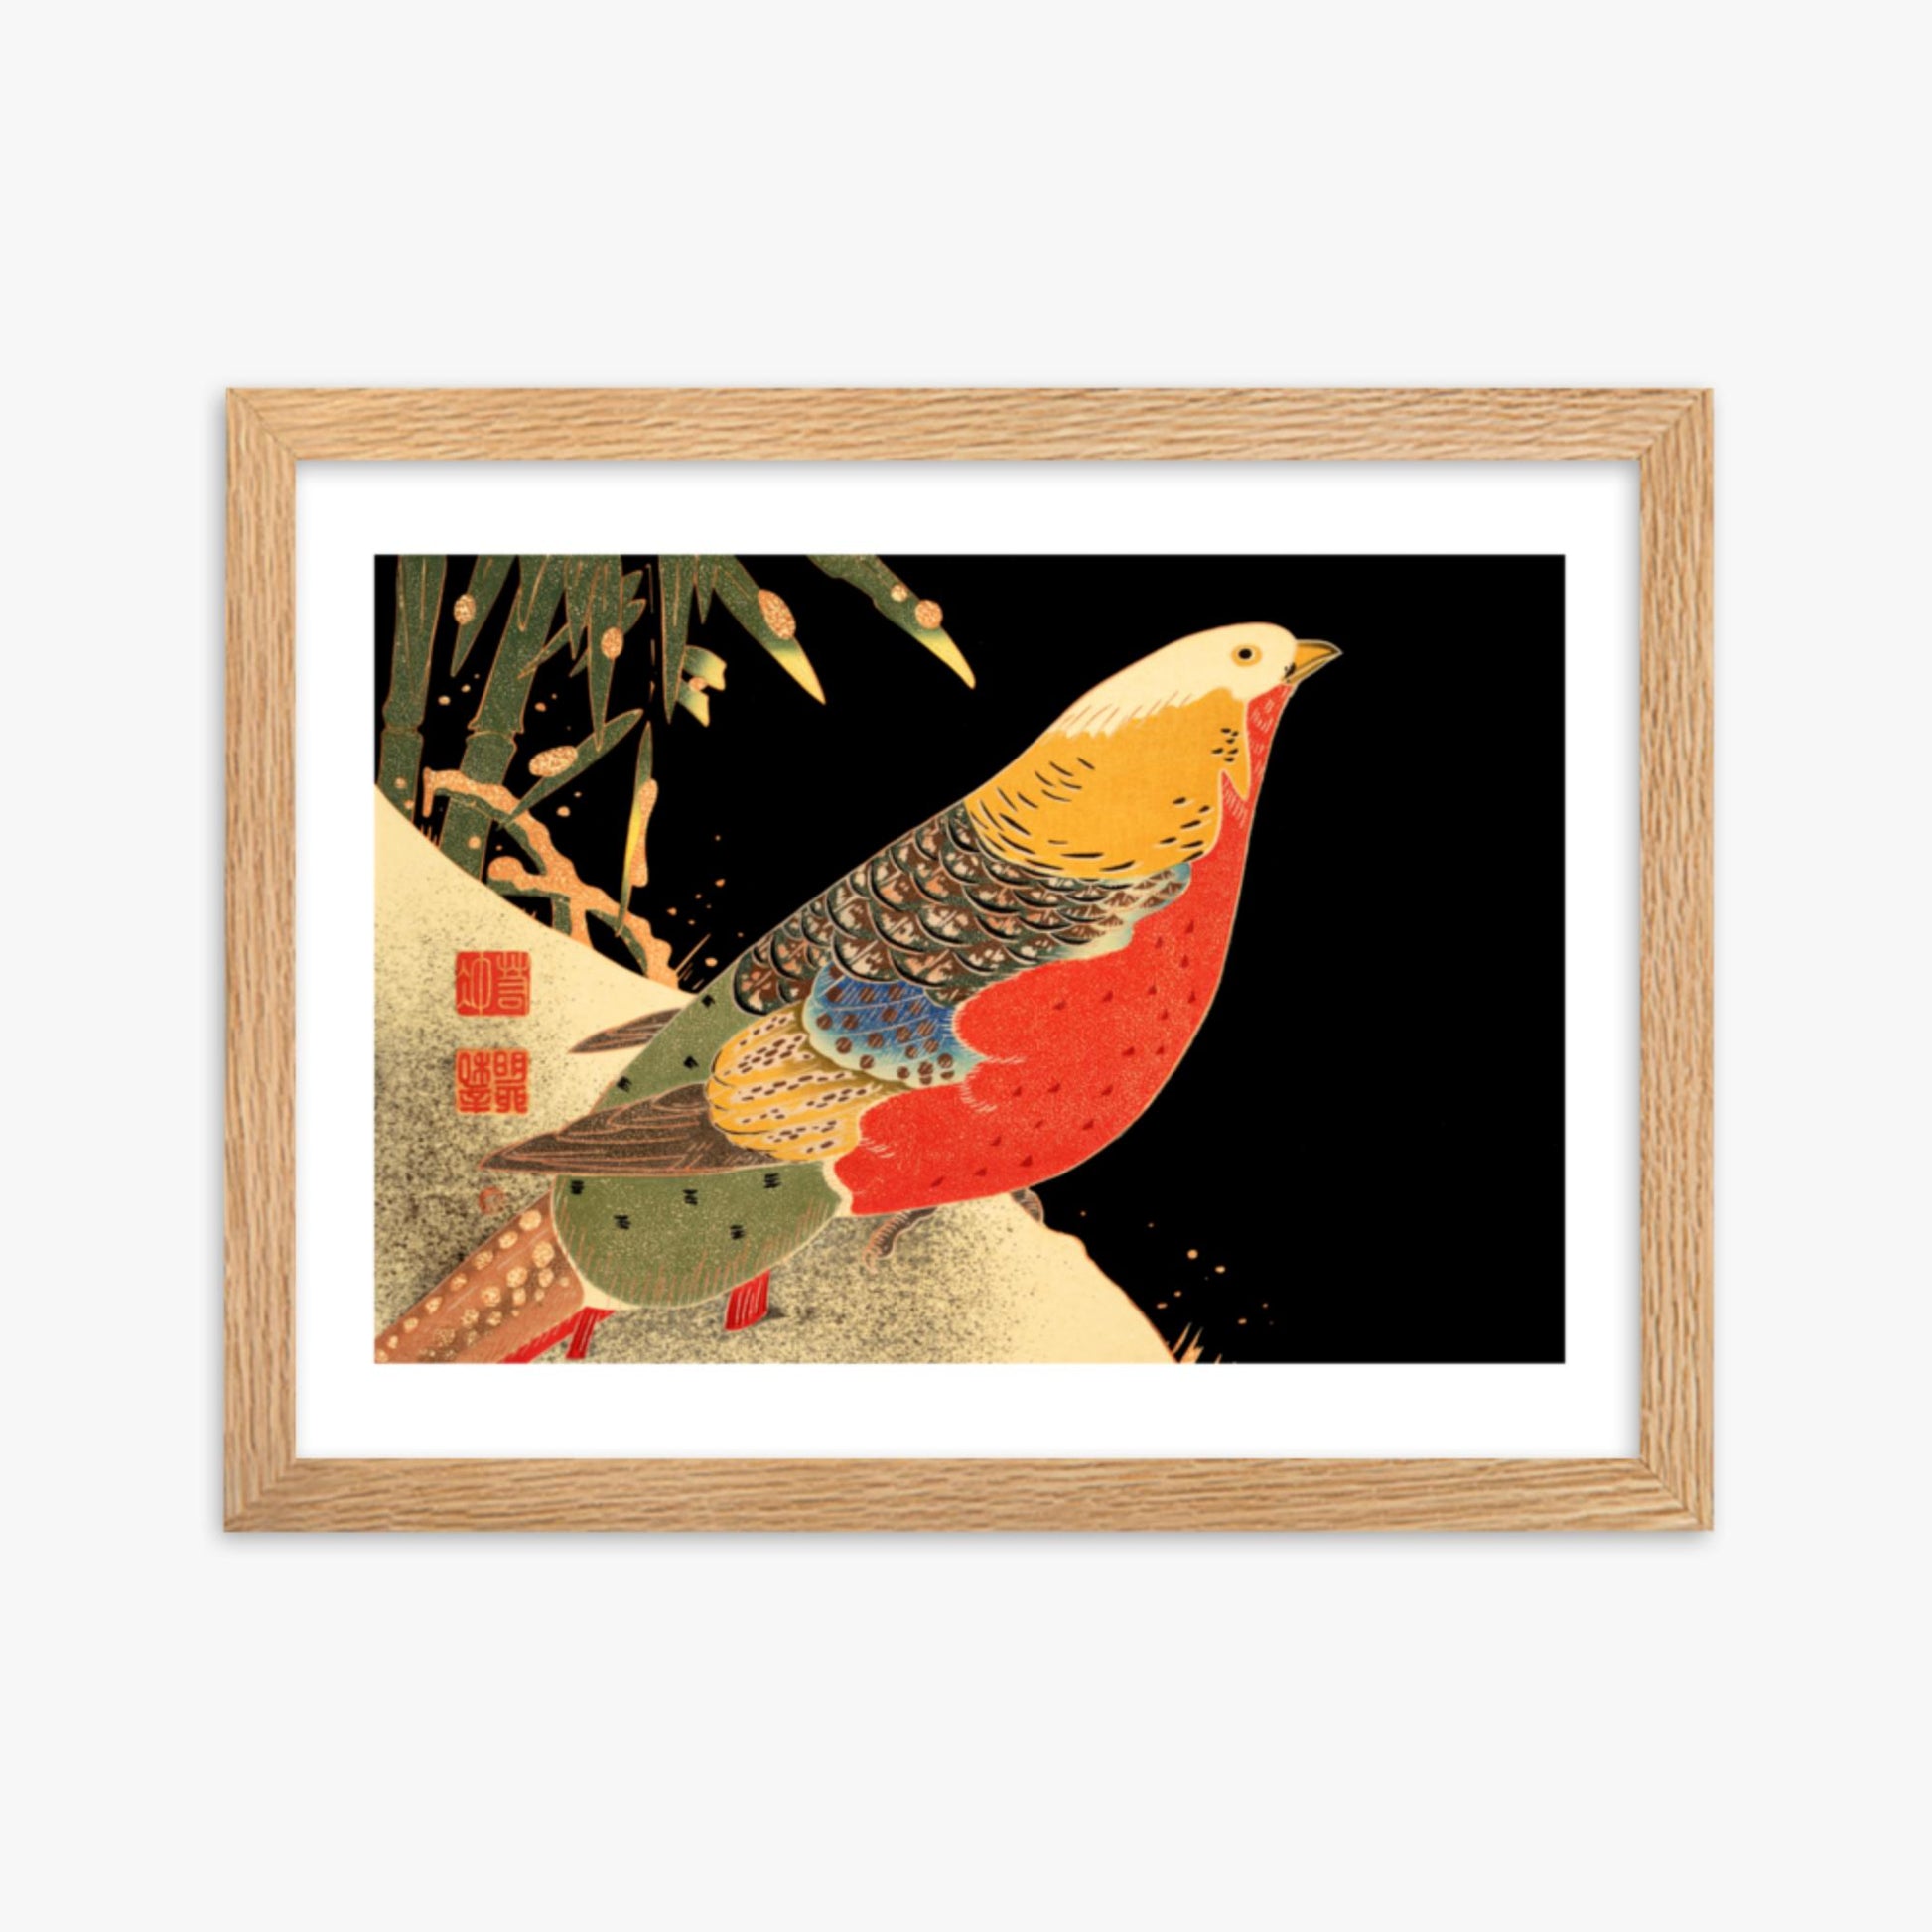 Ito Jakuchu - Golden Pheasant in the Snow 30x40 cm Poster With Oak Frame